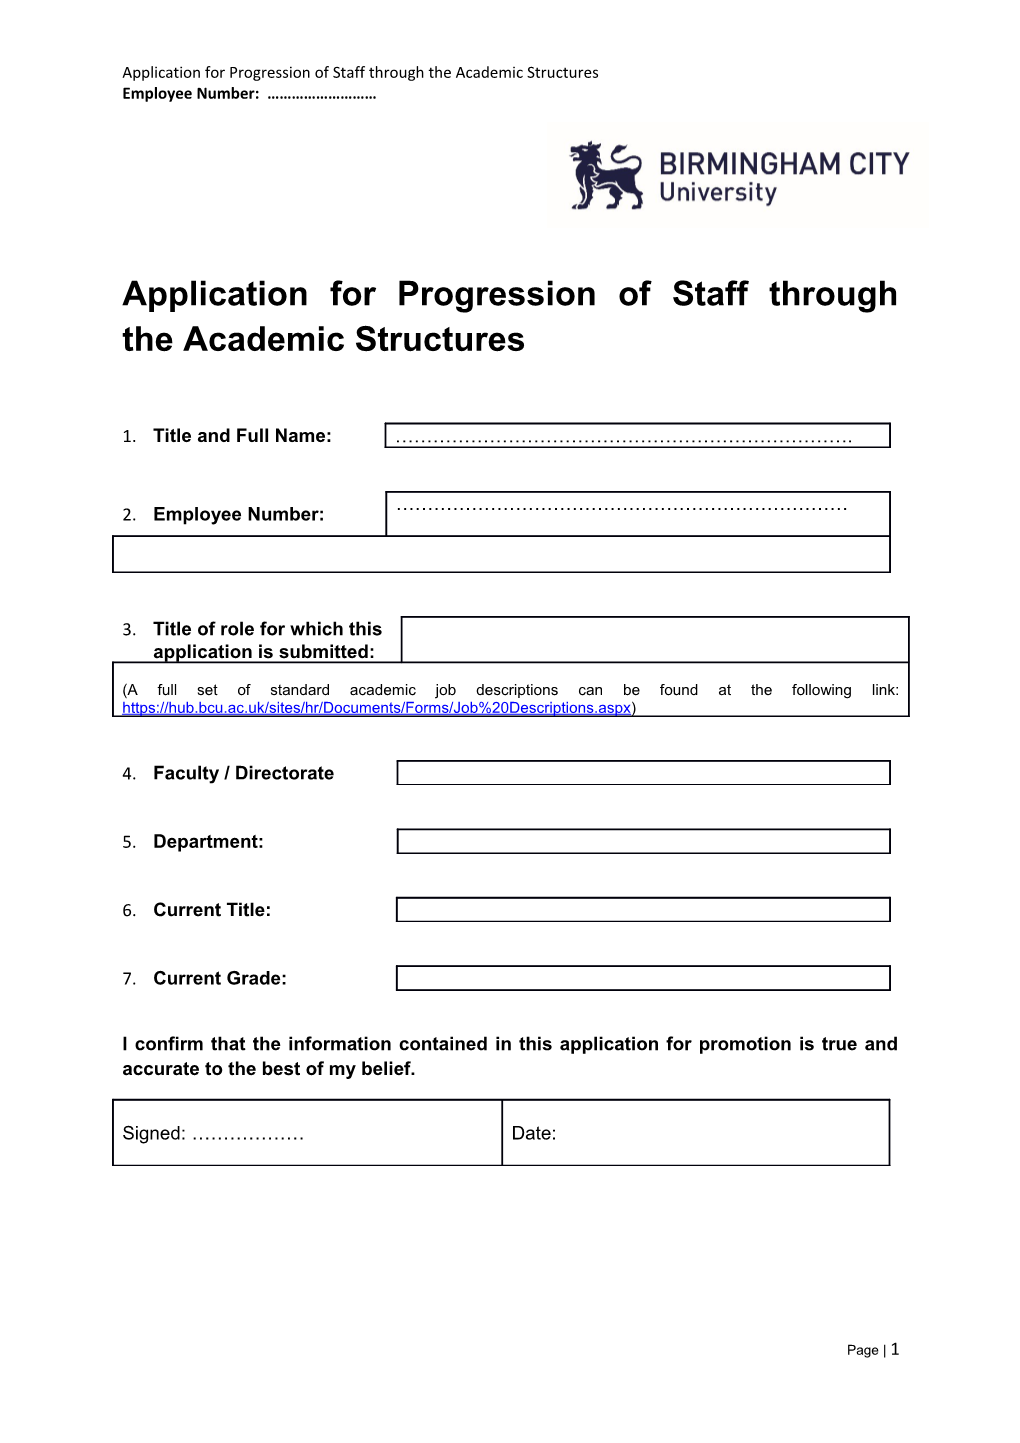 Application Form for Progression Through Academic Pay Structures